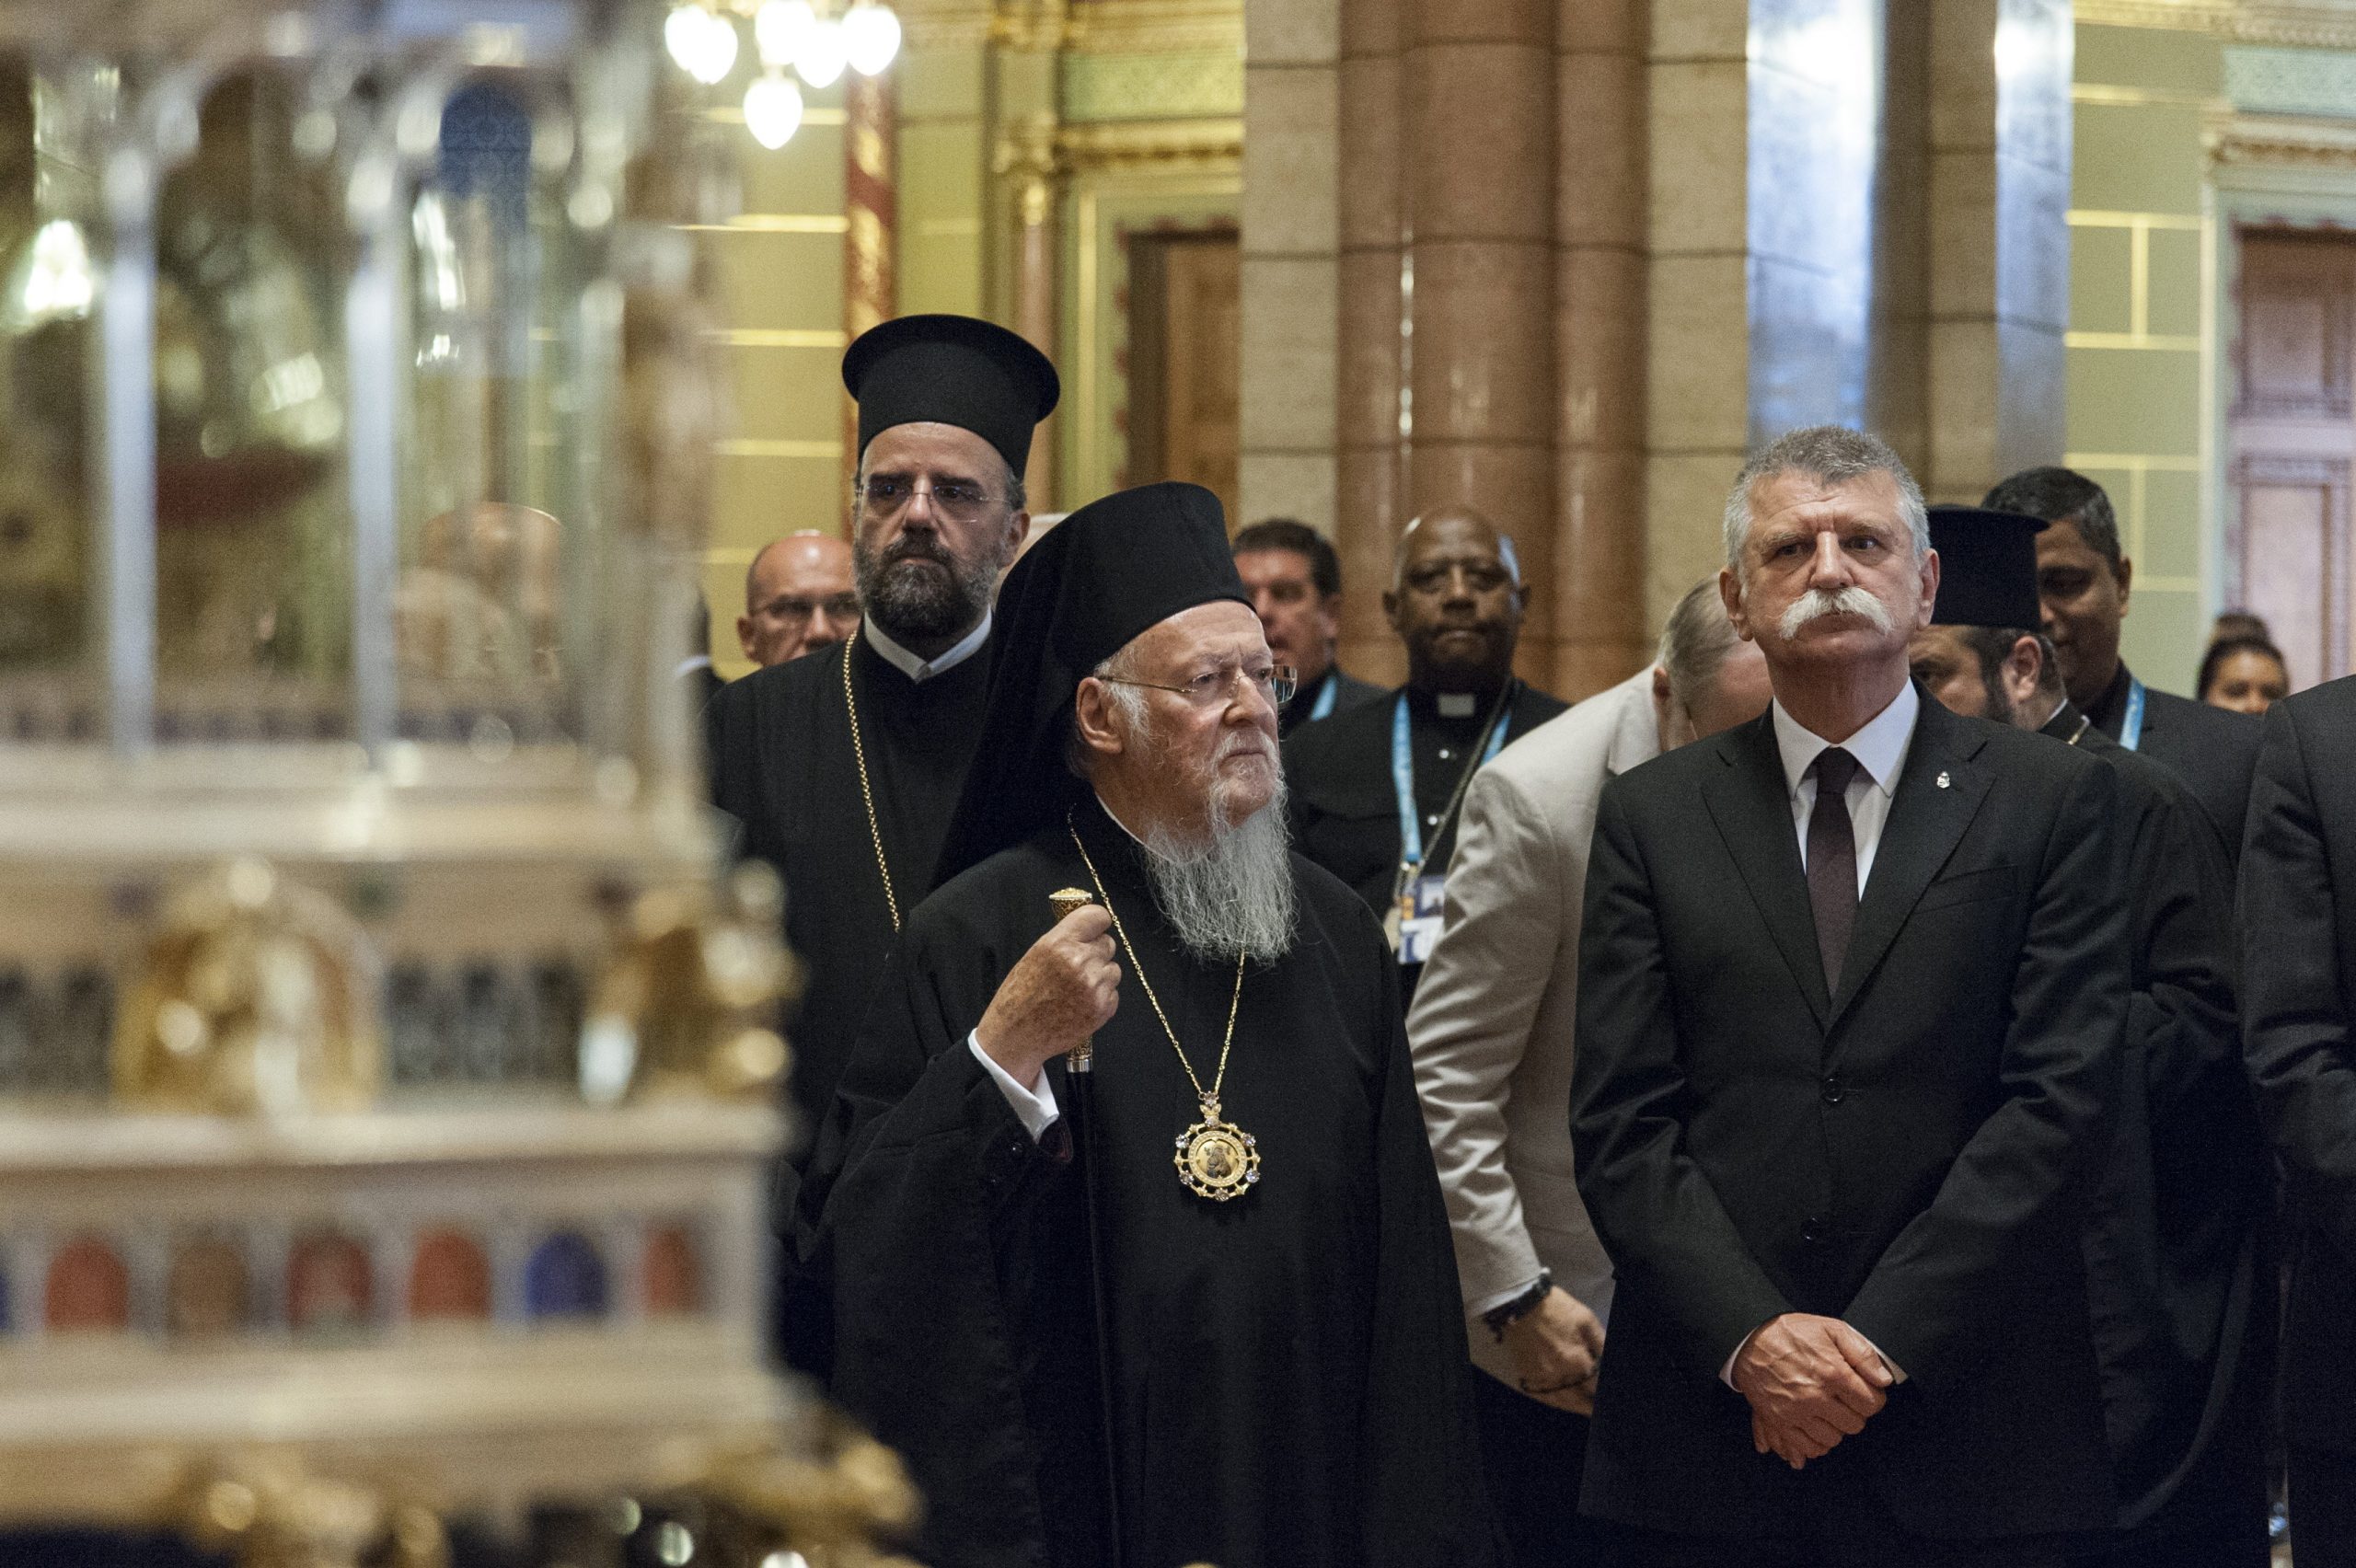 Patriarch of Constantinople to Visit Budapest and Pannonhalma Abbey